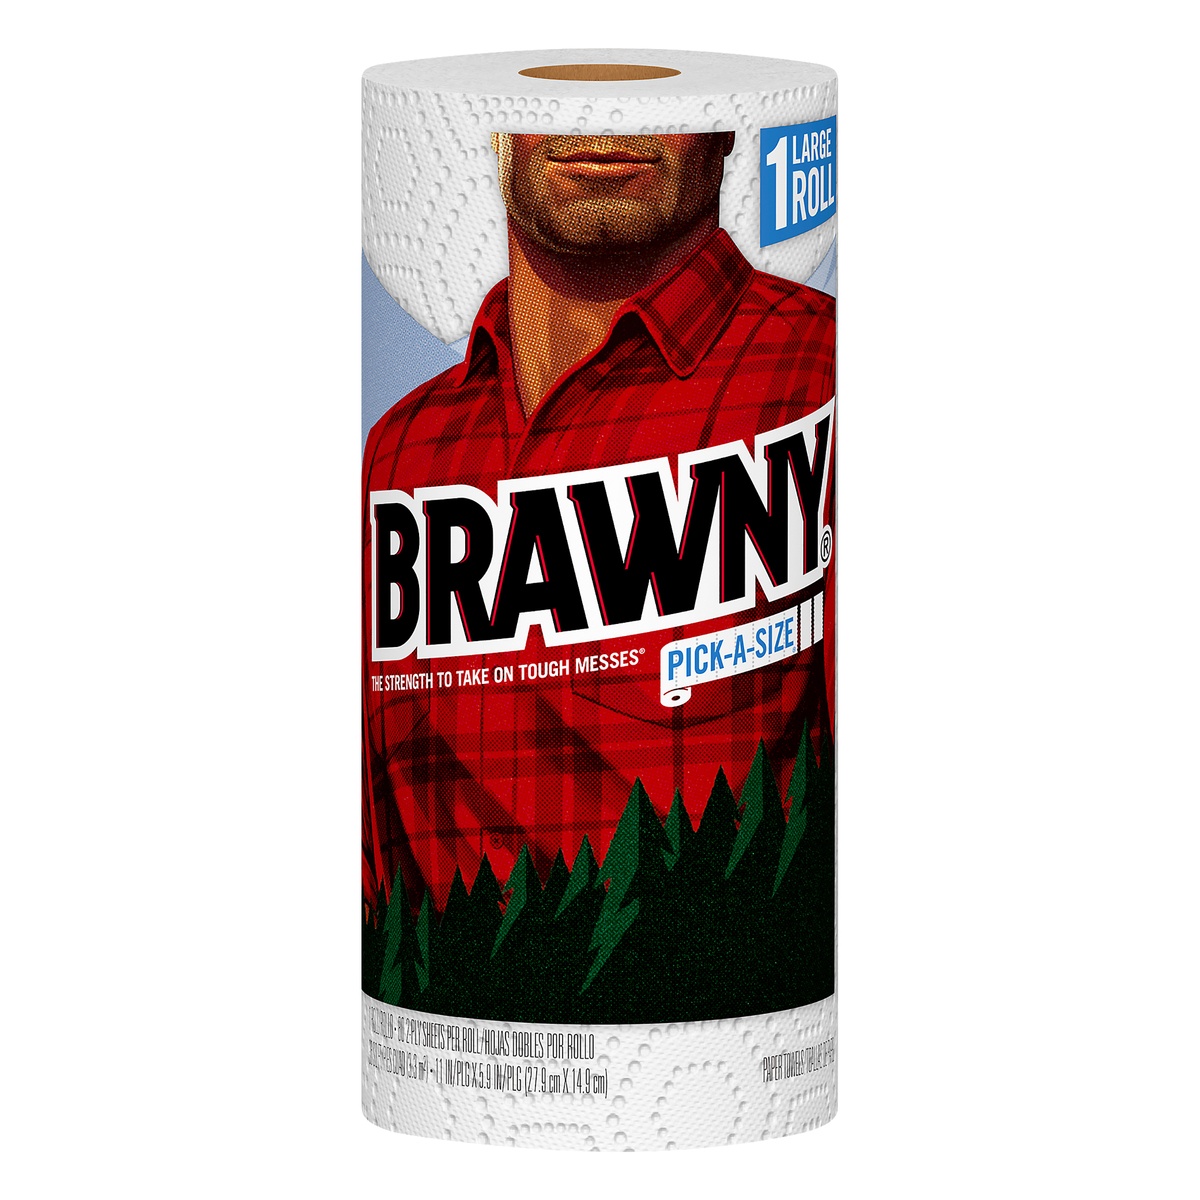 slide 1 of 1, Brawny Large Roll Pick-A-Size 2-Ply Paper Towels 1 ea, 297 sq ft